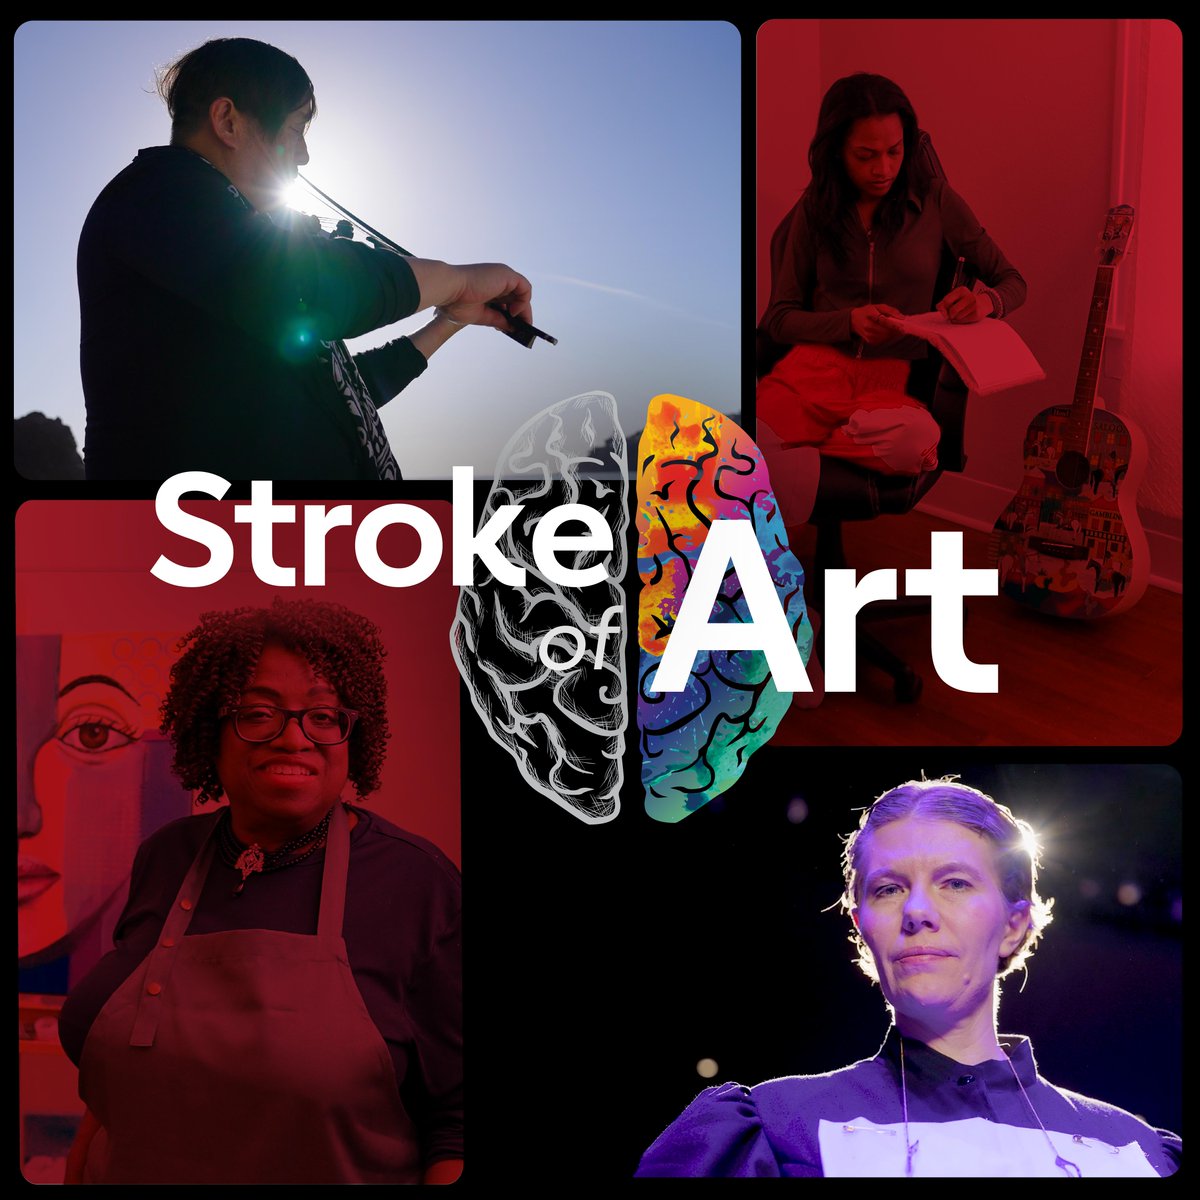 As we kick off #StrokeMonth, I am delighted to share the story of Minnie Watkins who picked up painting as a form of therapy after suffering from a stroke. Minnie, thank you for sharing your story - you are an inspiration! spr.ly/6016jTSMC